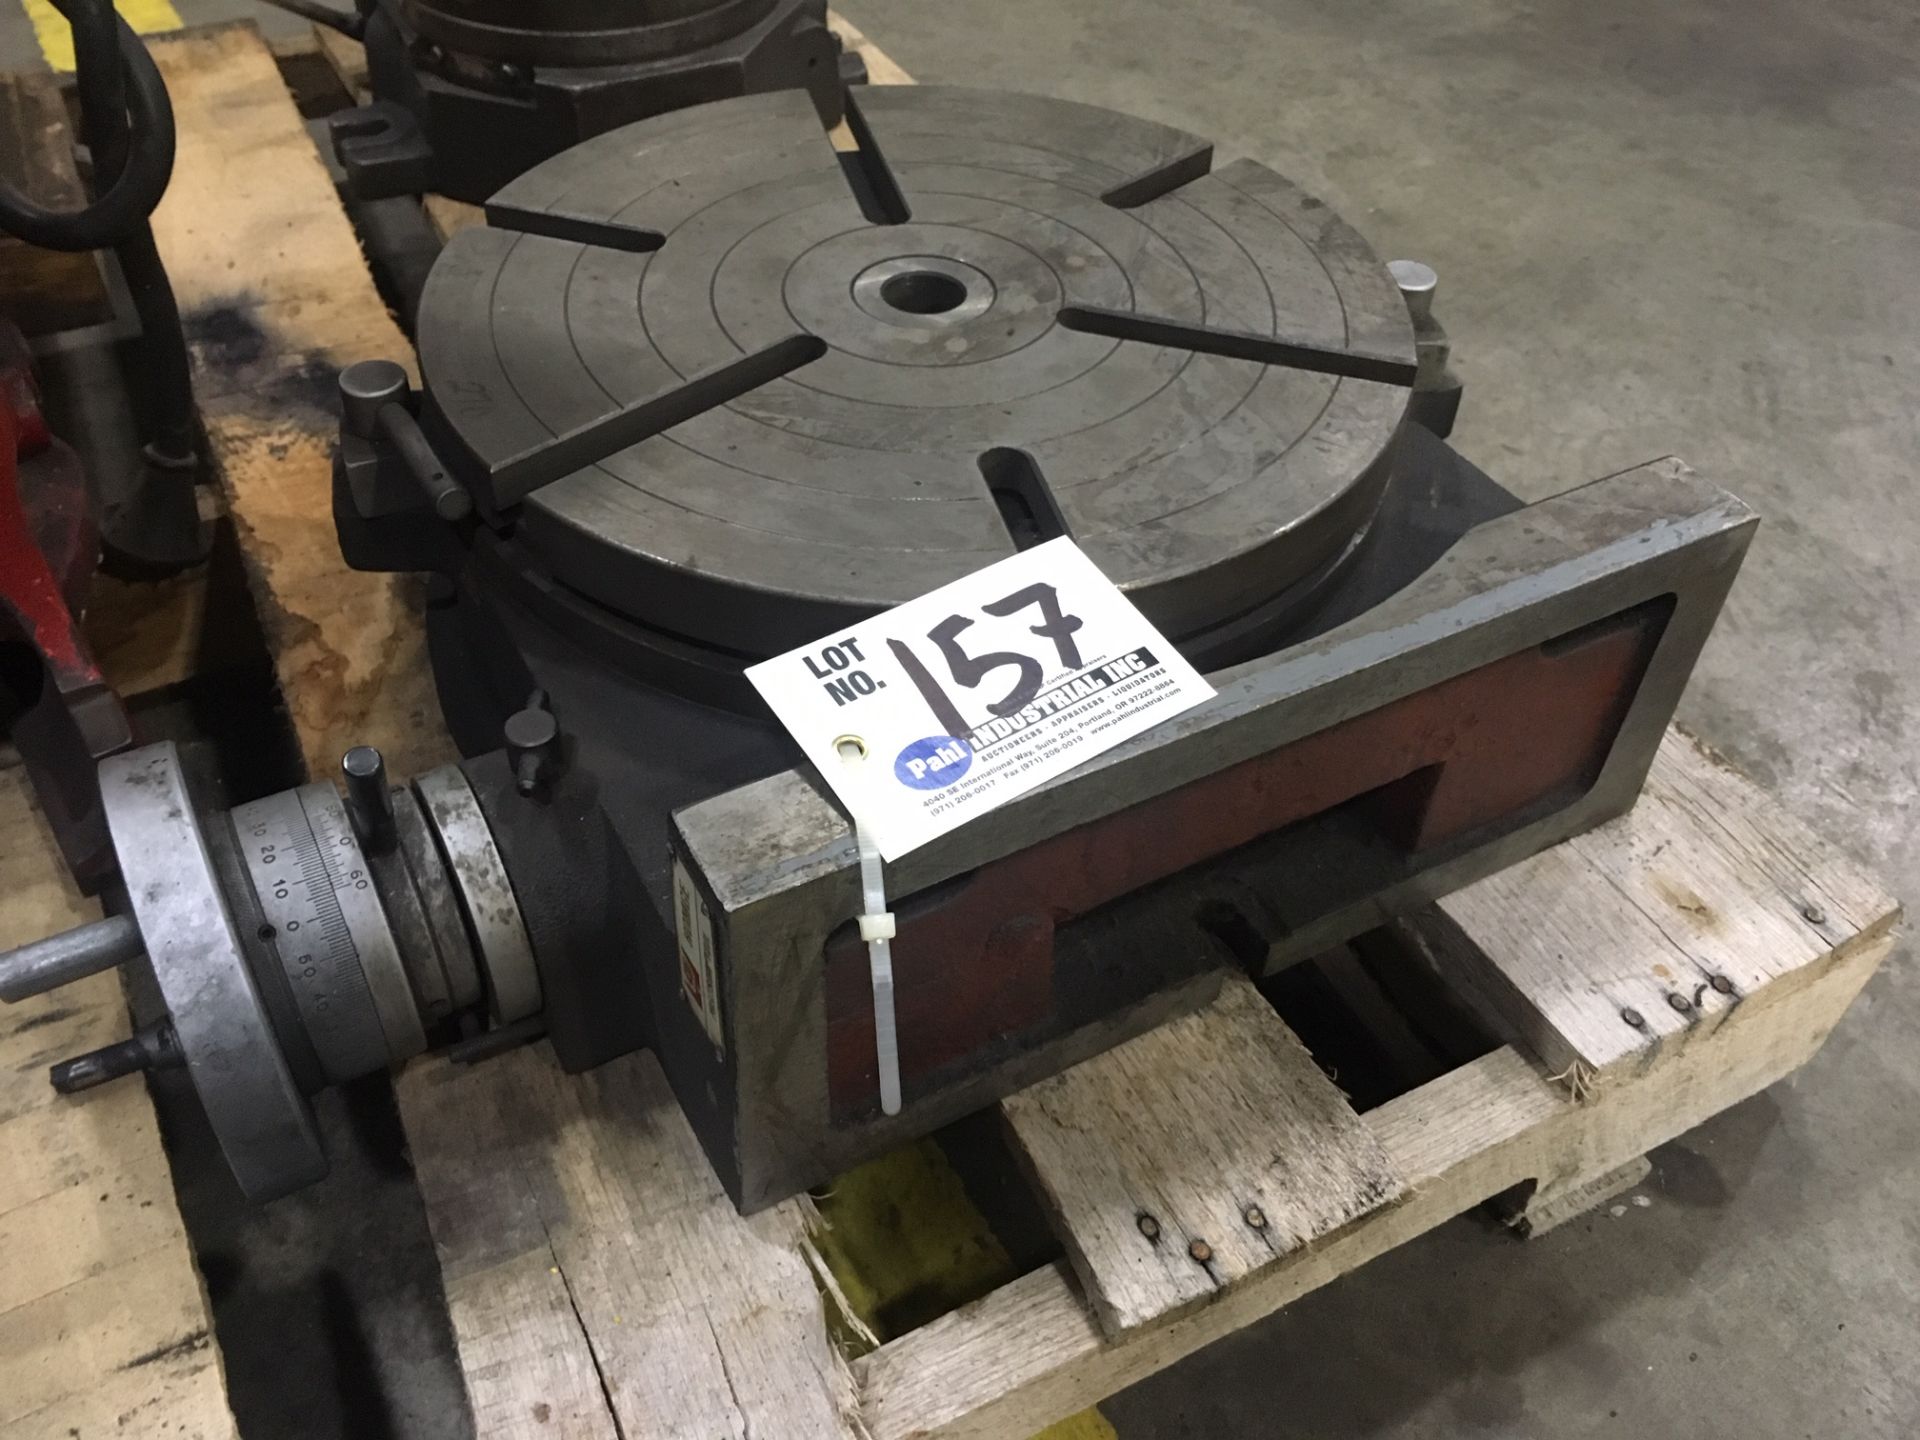 Homge 14" Precision rotary T-Slot table with vertical and horizontal base